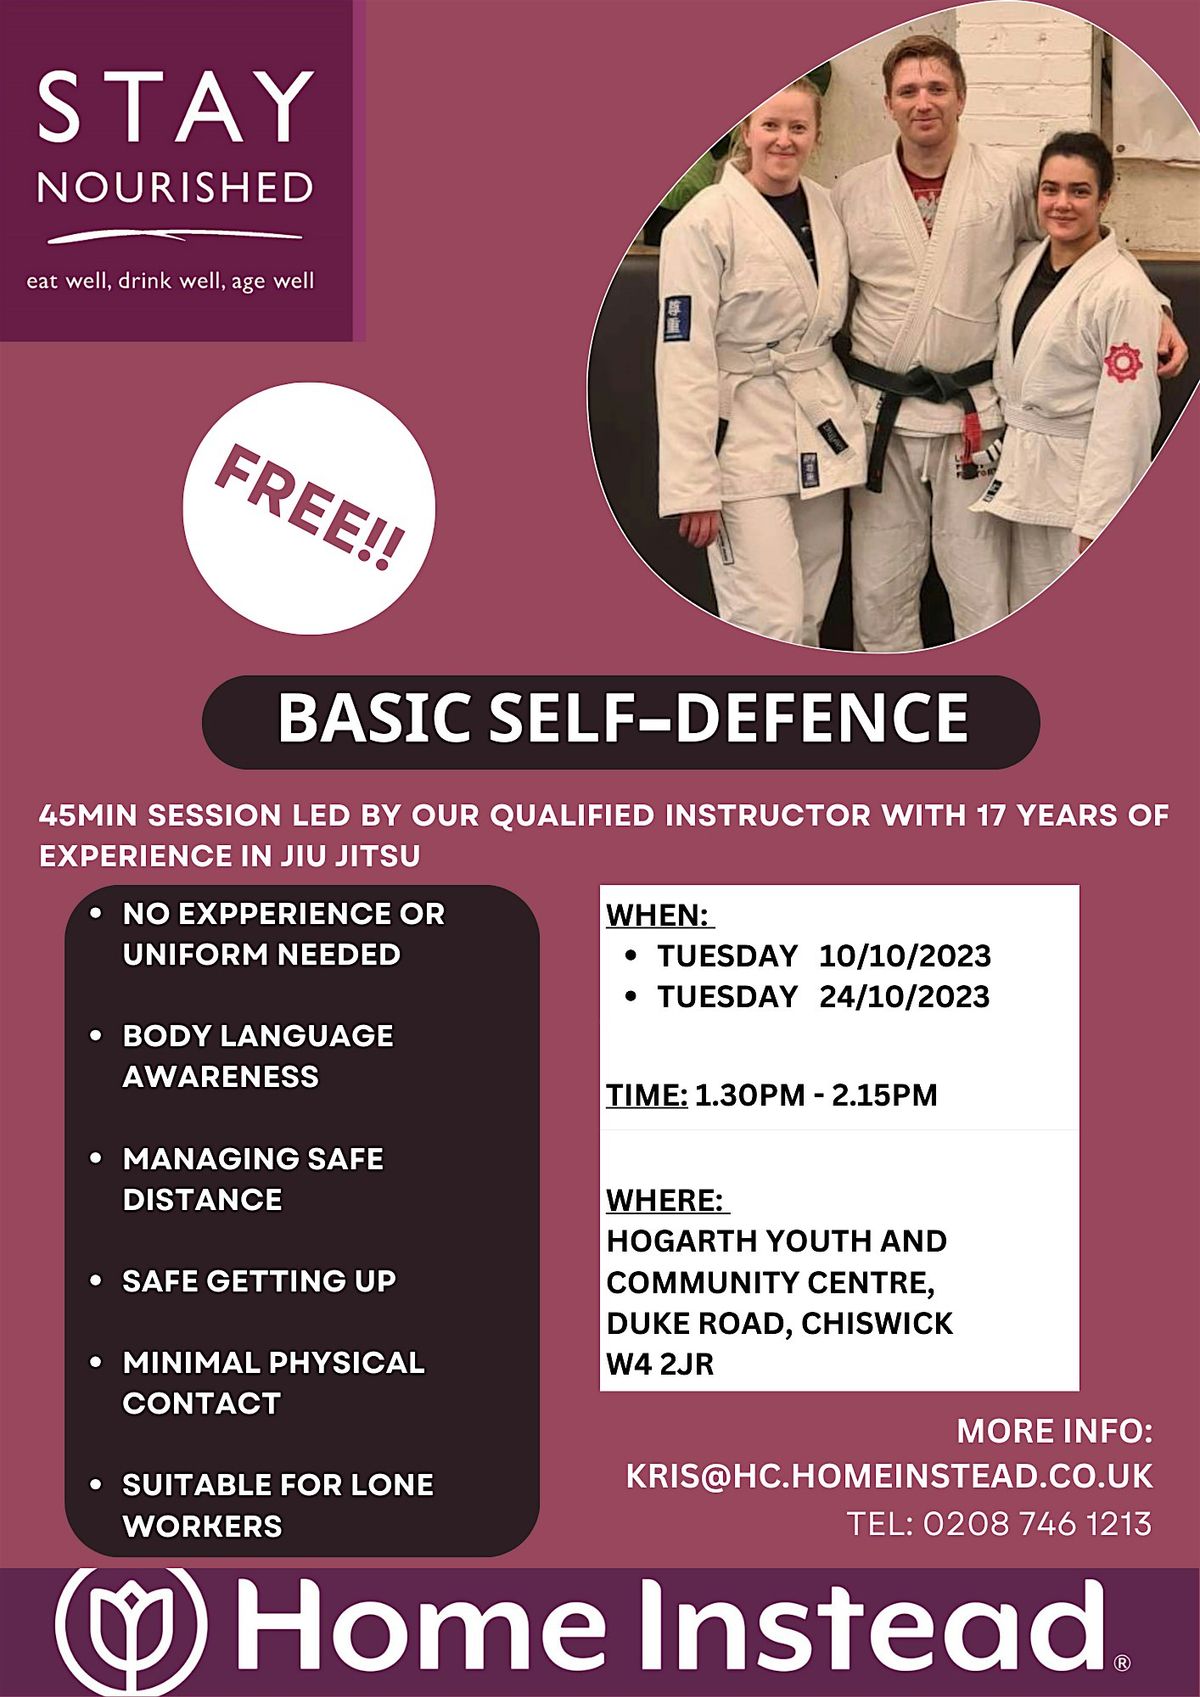 FREE SELF-DEFENCE CLASS IN CHISWICK W4